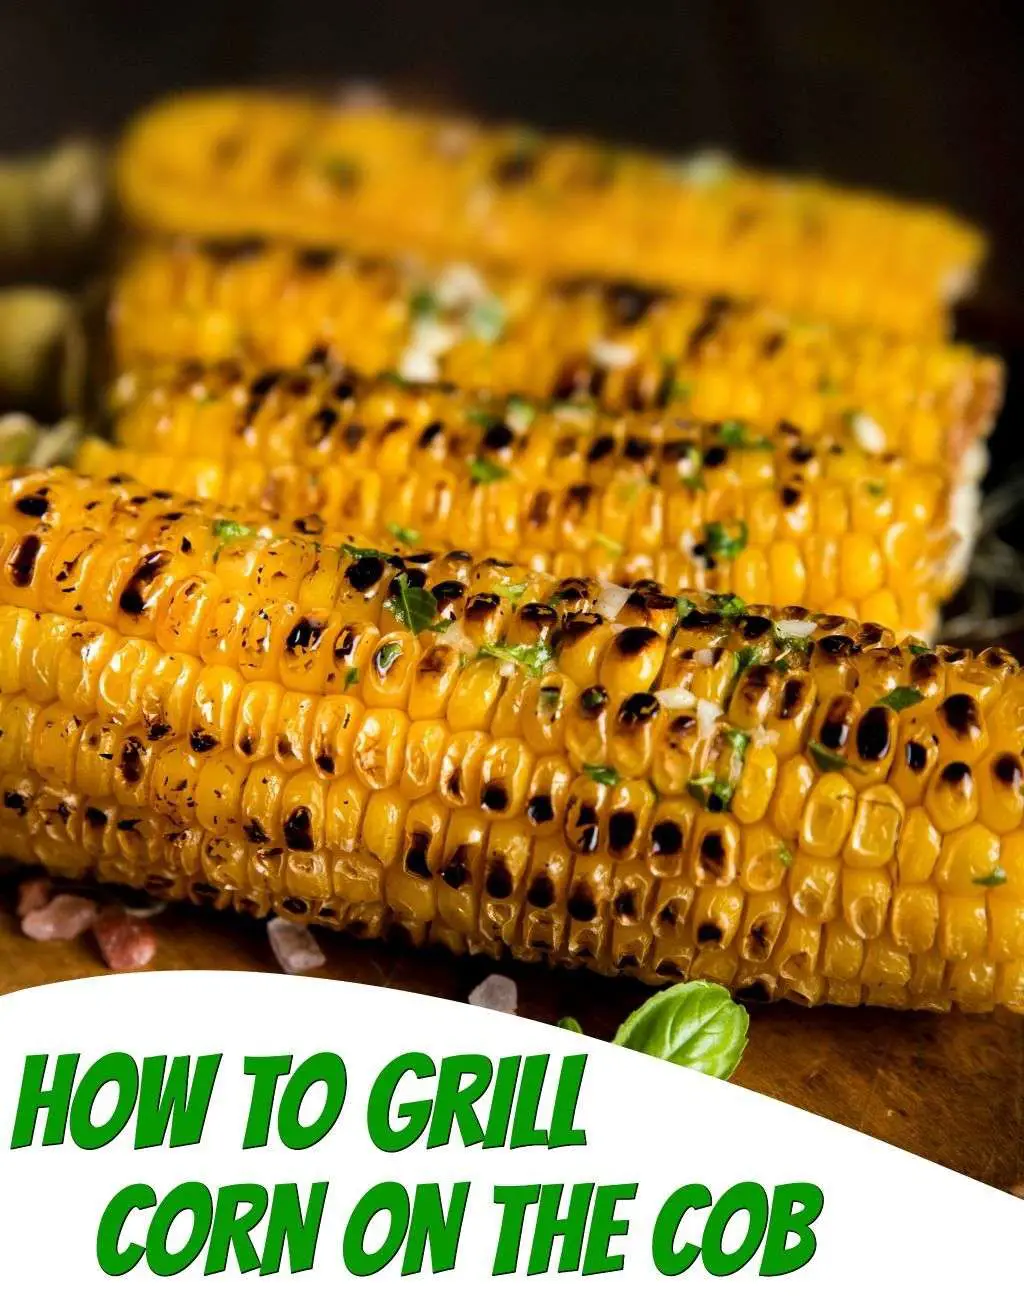 How do you grill corn on the cob? Let